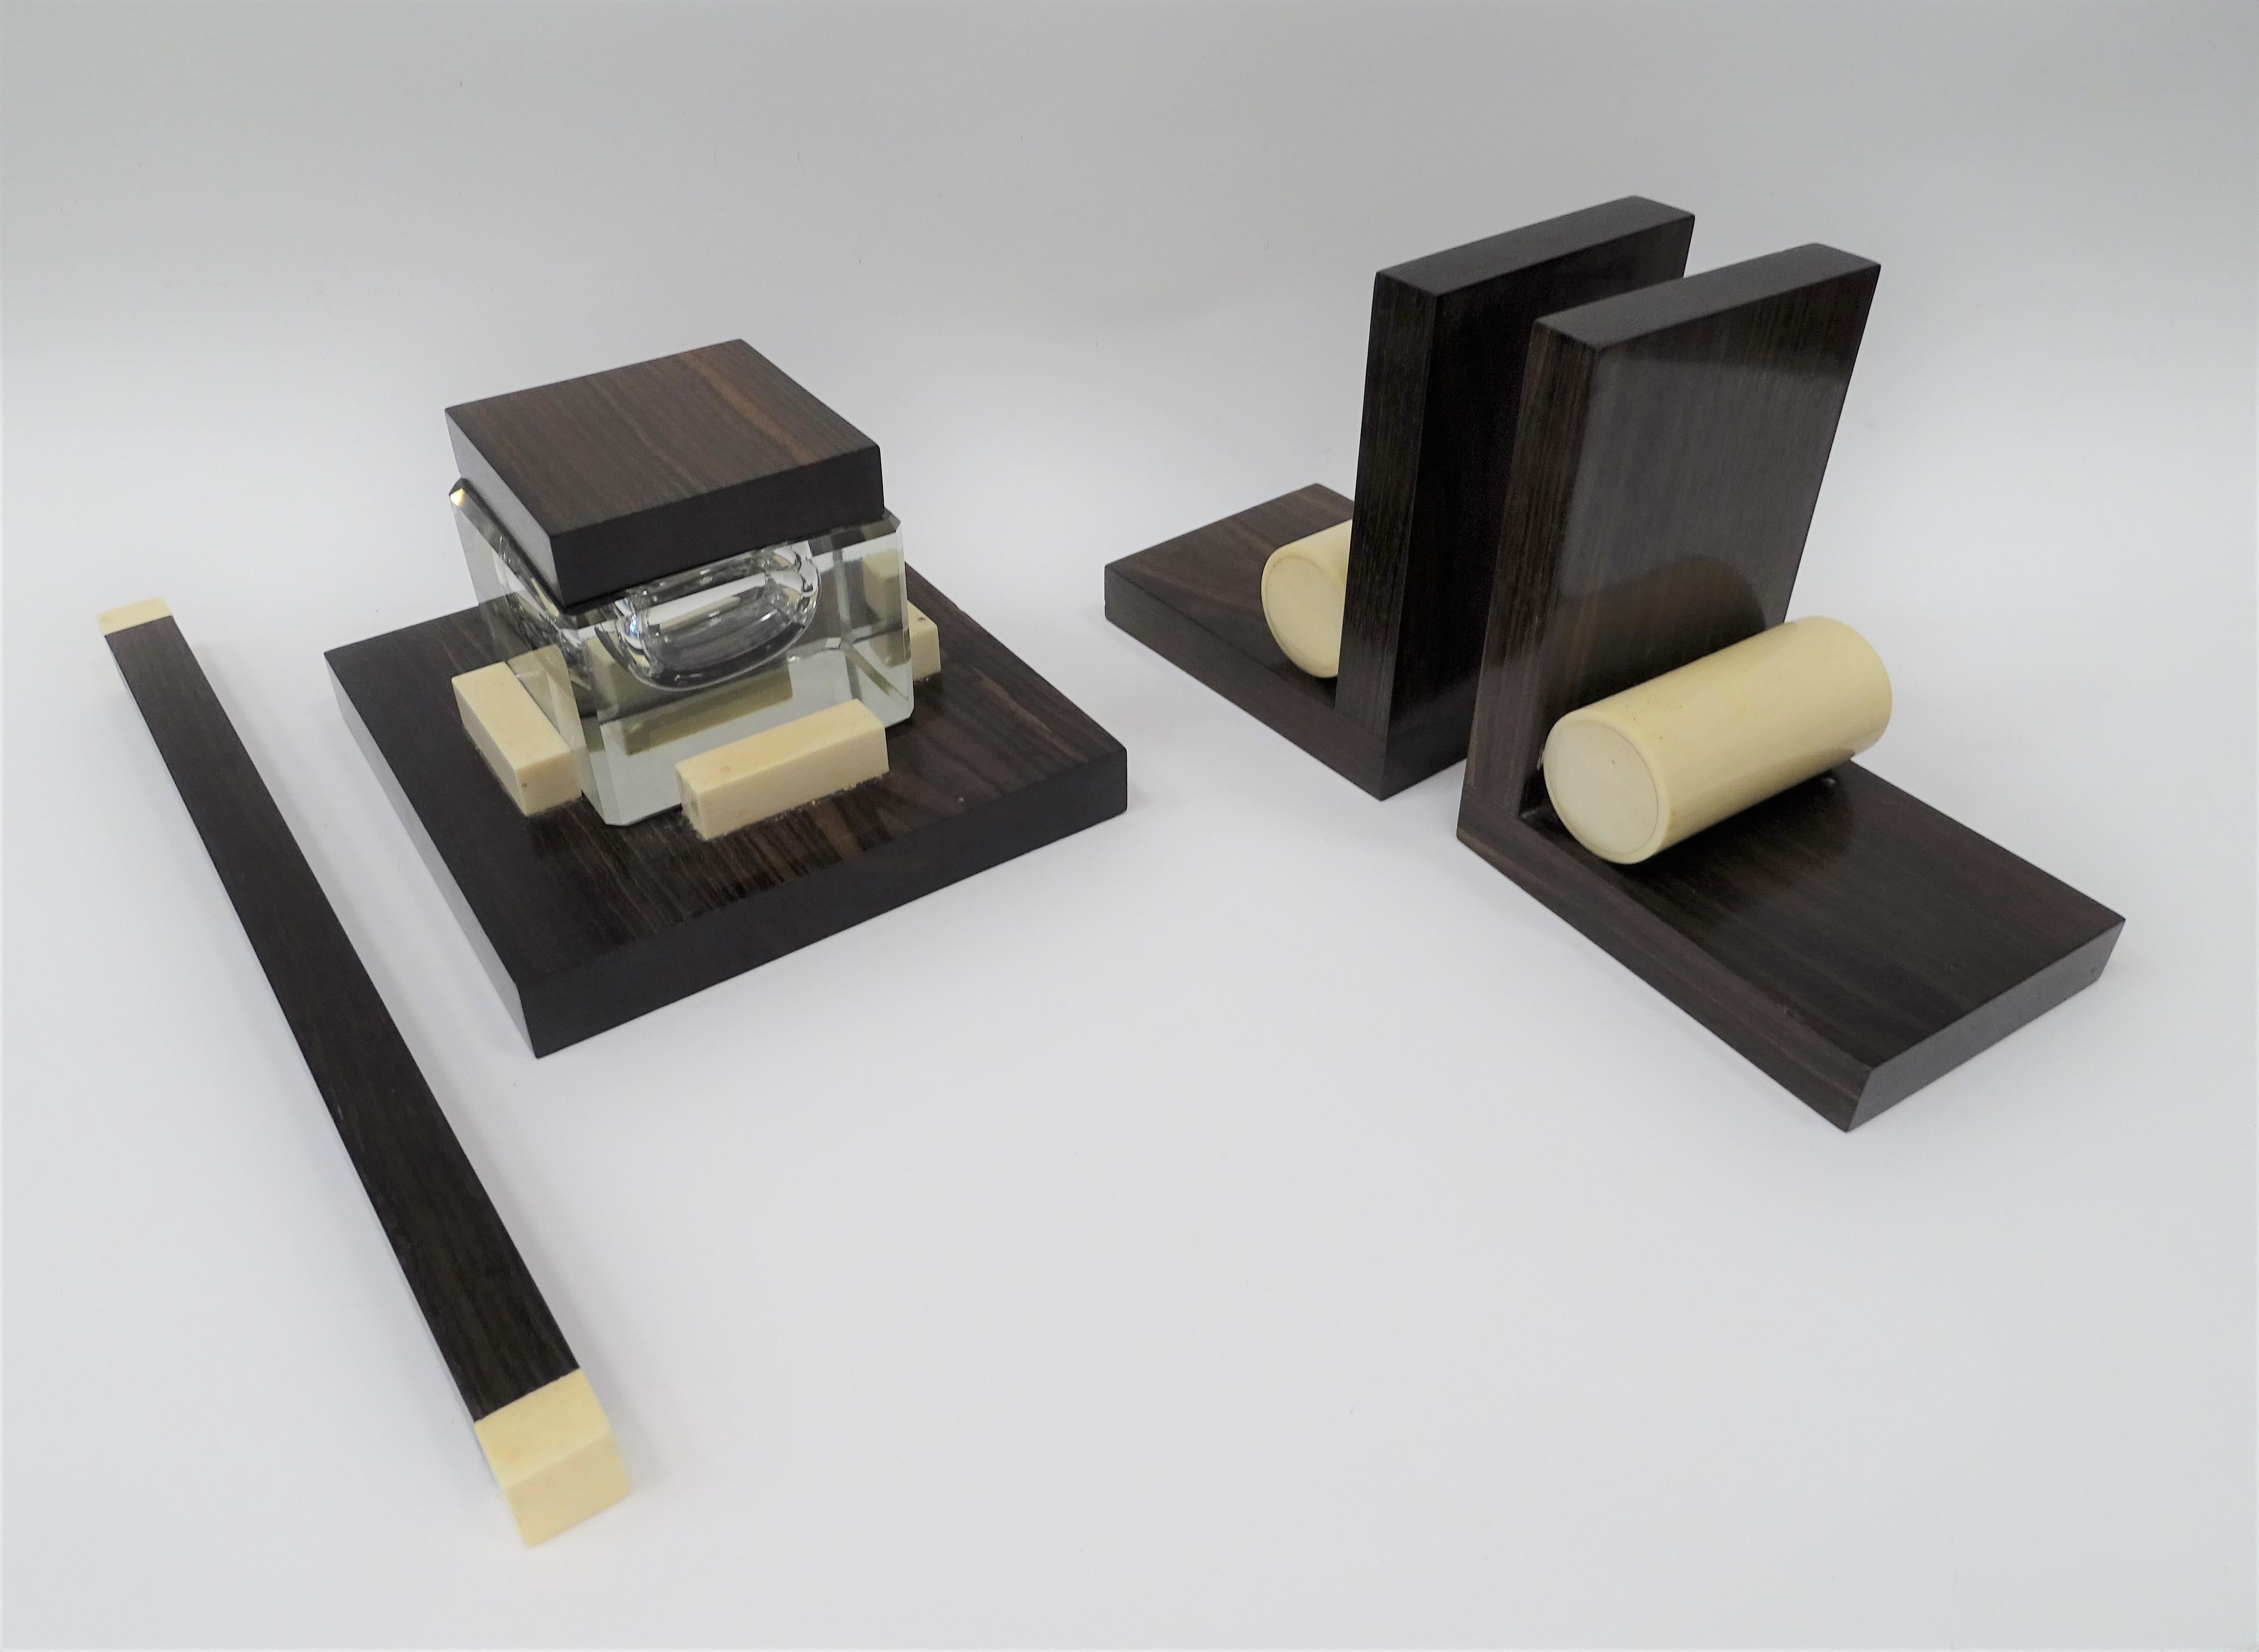 Gorgeous and very refined Art Deco French writing set made of hardwood, inlaid bone simil and glass. The complete set is preserved in perfect condition, consisting of the inkwell, the blotter, the ruler and the bookend. Elegance, functionality and